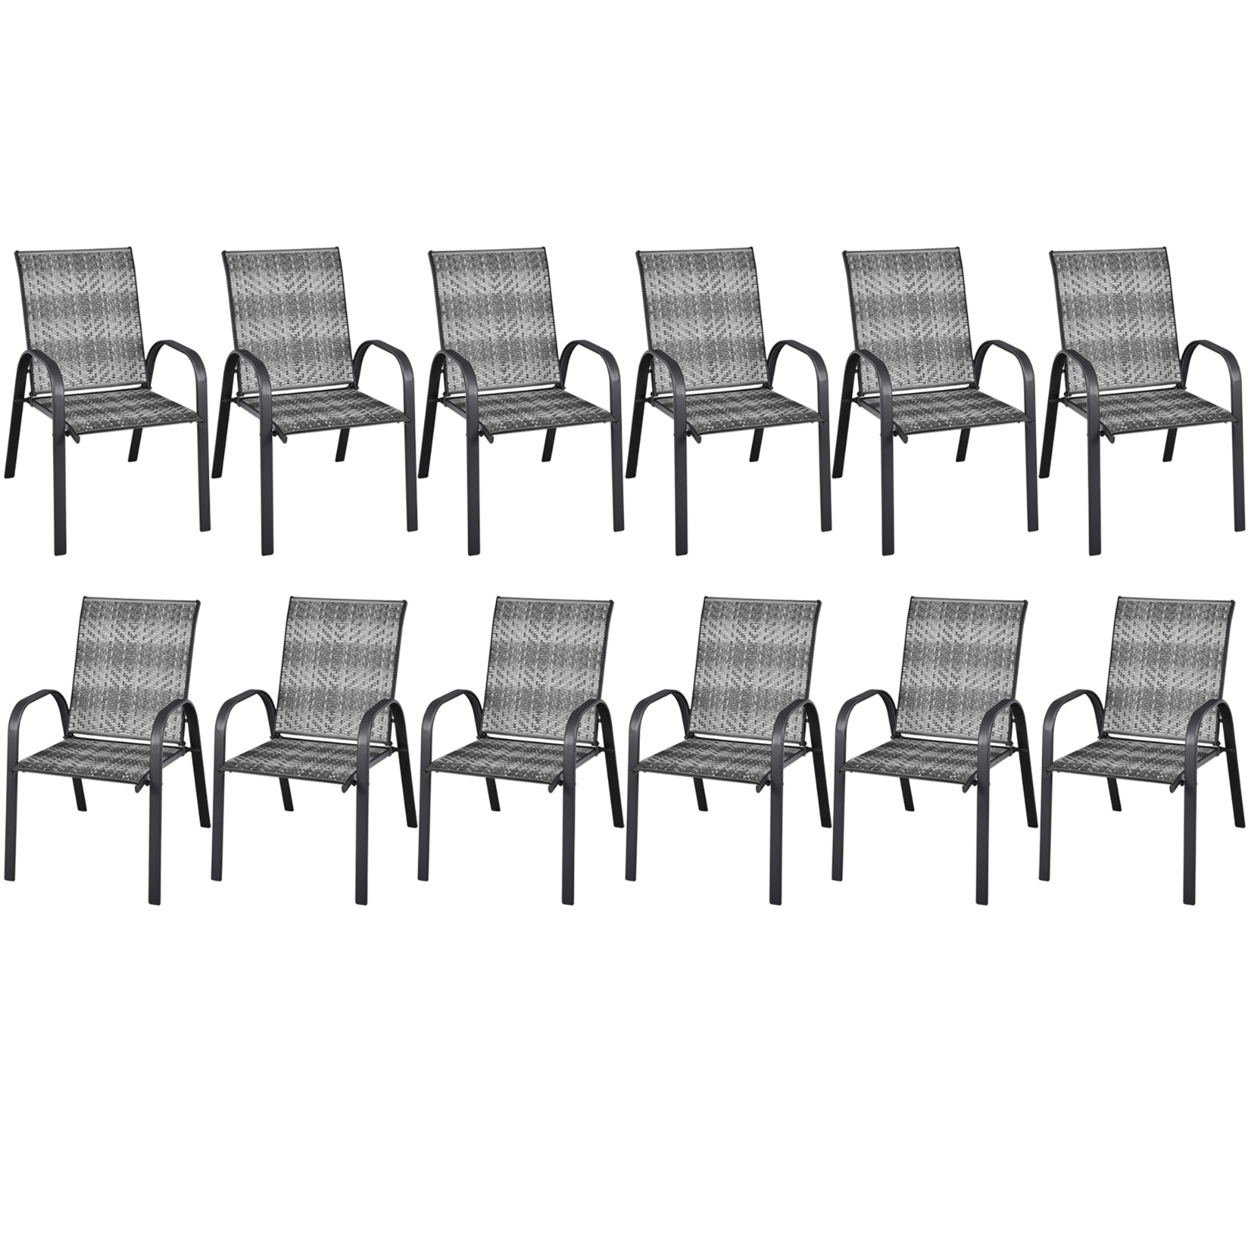 12PCS Outdoor PE Wicker Stacking Dining Chairs Patio Arm Chairs - Grey